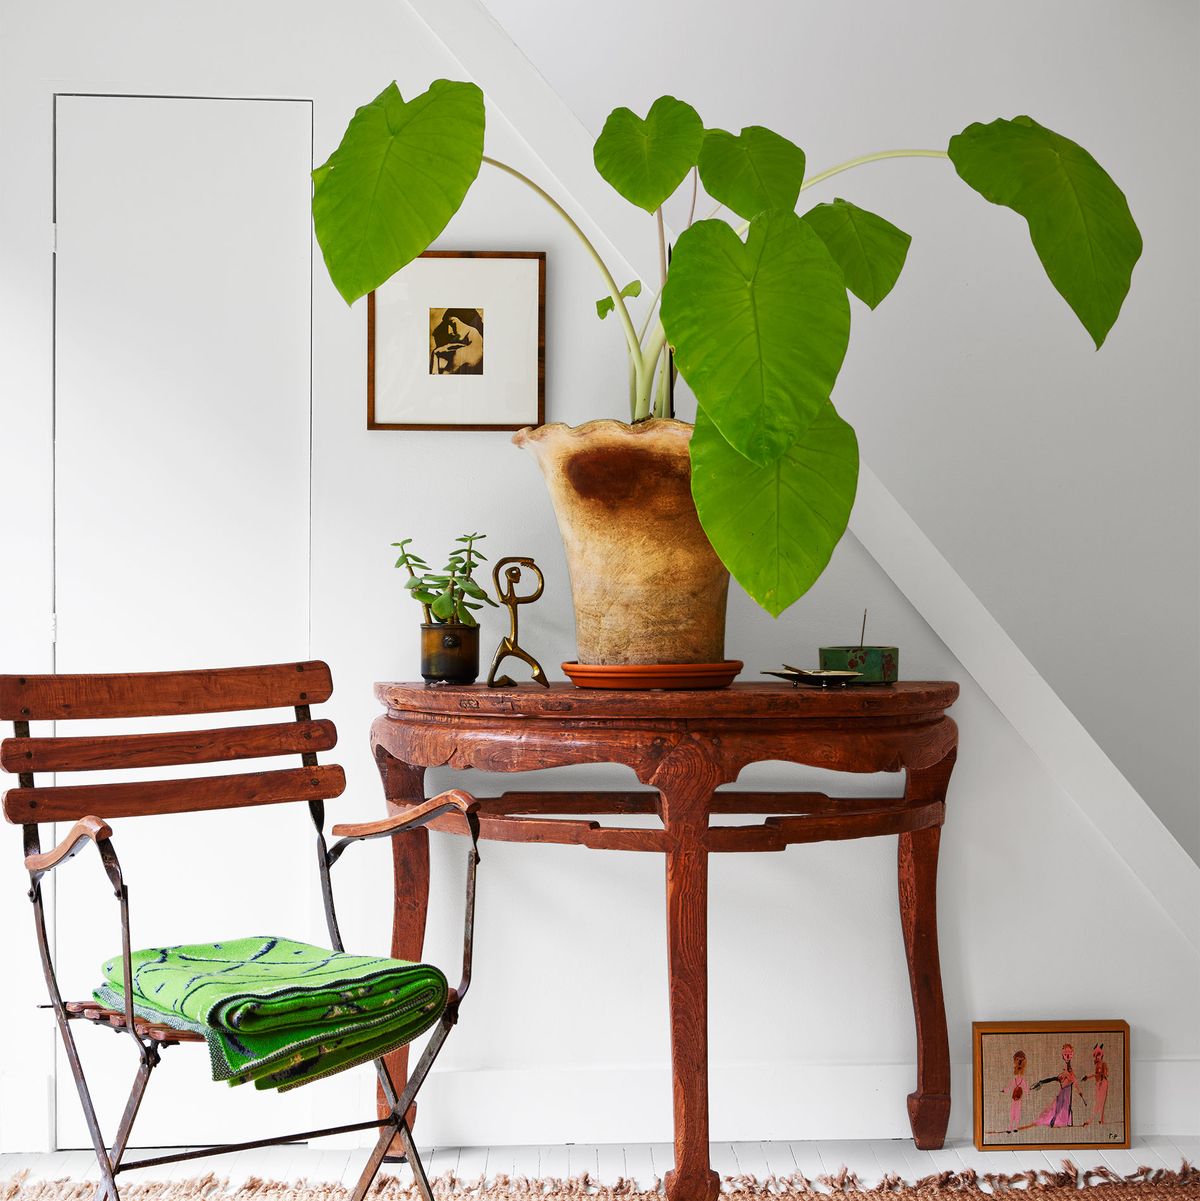 in the entry to a cottage is a bistro style chair with a green folded towel on the seat, a demilune table with a large potted plant and a small brass sculpture, a sisal rug, an artwork on the wall and one on the floor